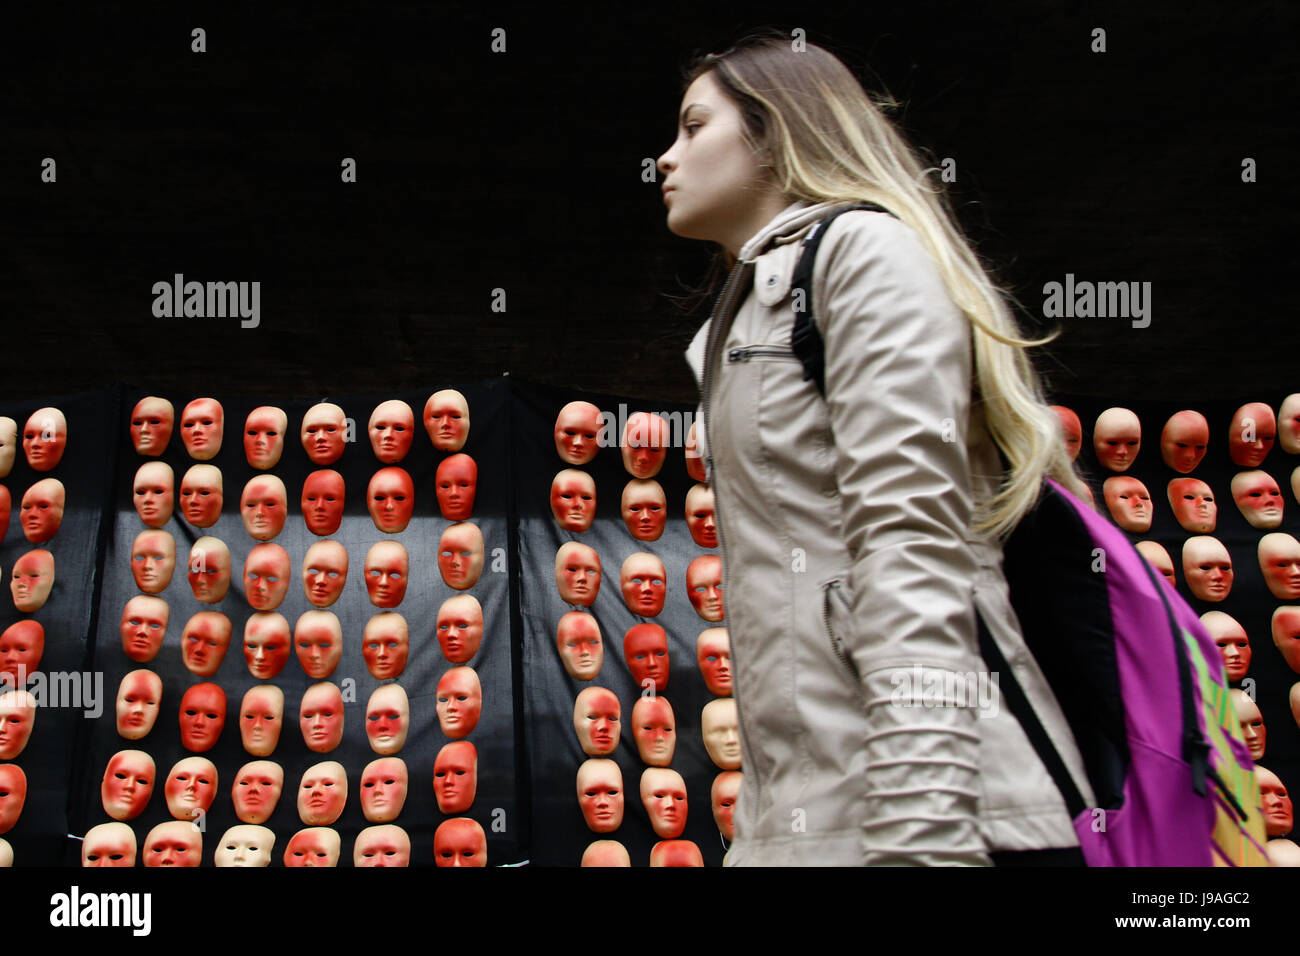 Sao Paulo, Brazil. 1st June, 2017. Rio de Paz / SP, affiliated to the UN DPI, holds a public demonstration this Thursday (01) from 6 a.m. to 2 p.m. on Avenida Paulista (MASP) in São Paulo. The installation of the red-painted masks, presented last week in Brasilia and Rio de Janeiro, is now in the Masp Vão Livre on Paulista Avenue. The masks symbolize the feeling of shame that should have been stamped on the face of the Brazilian political class because of its involvement with corruption scandals revealed by the Lava-Jato operation. June 1, 2017. Credit: FotoRua/Alamy Live News Stock Photo